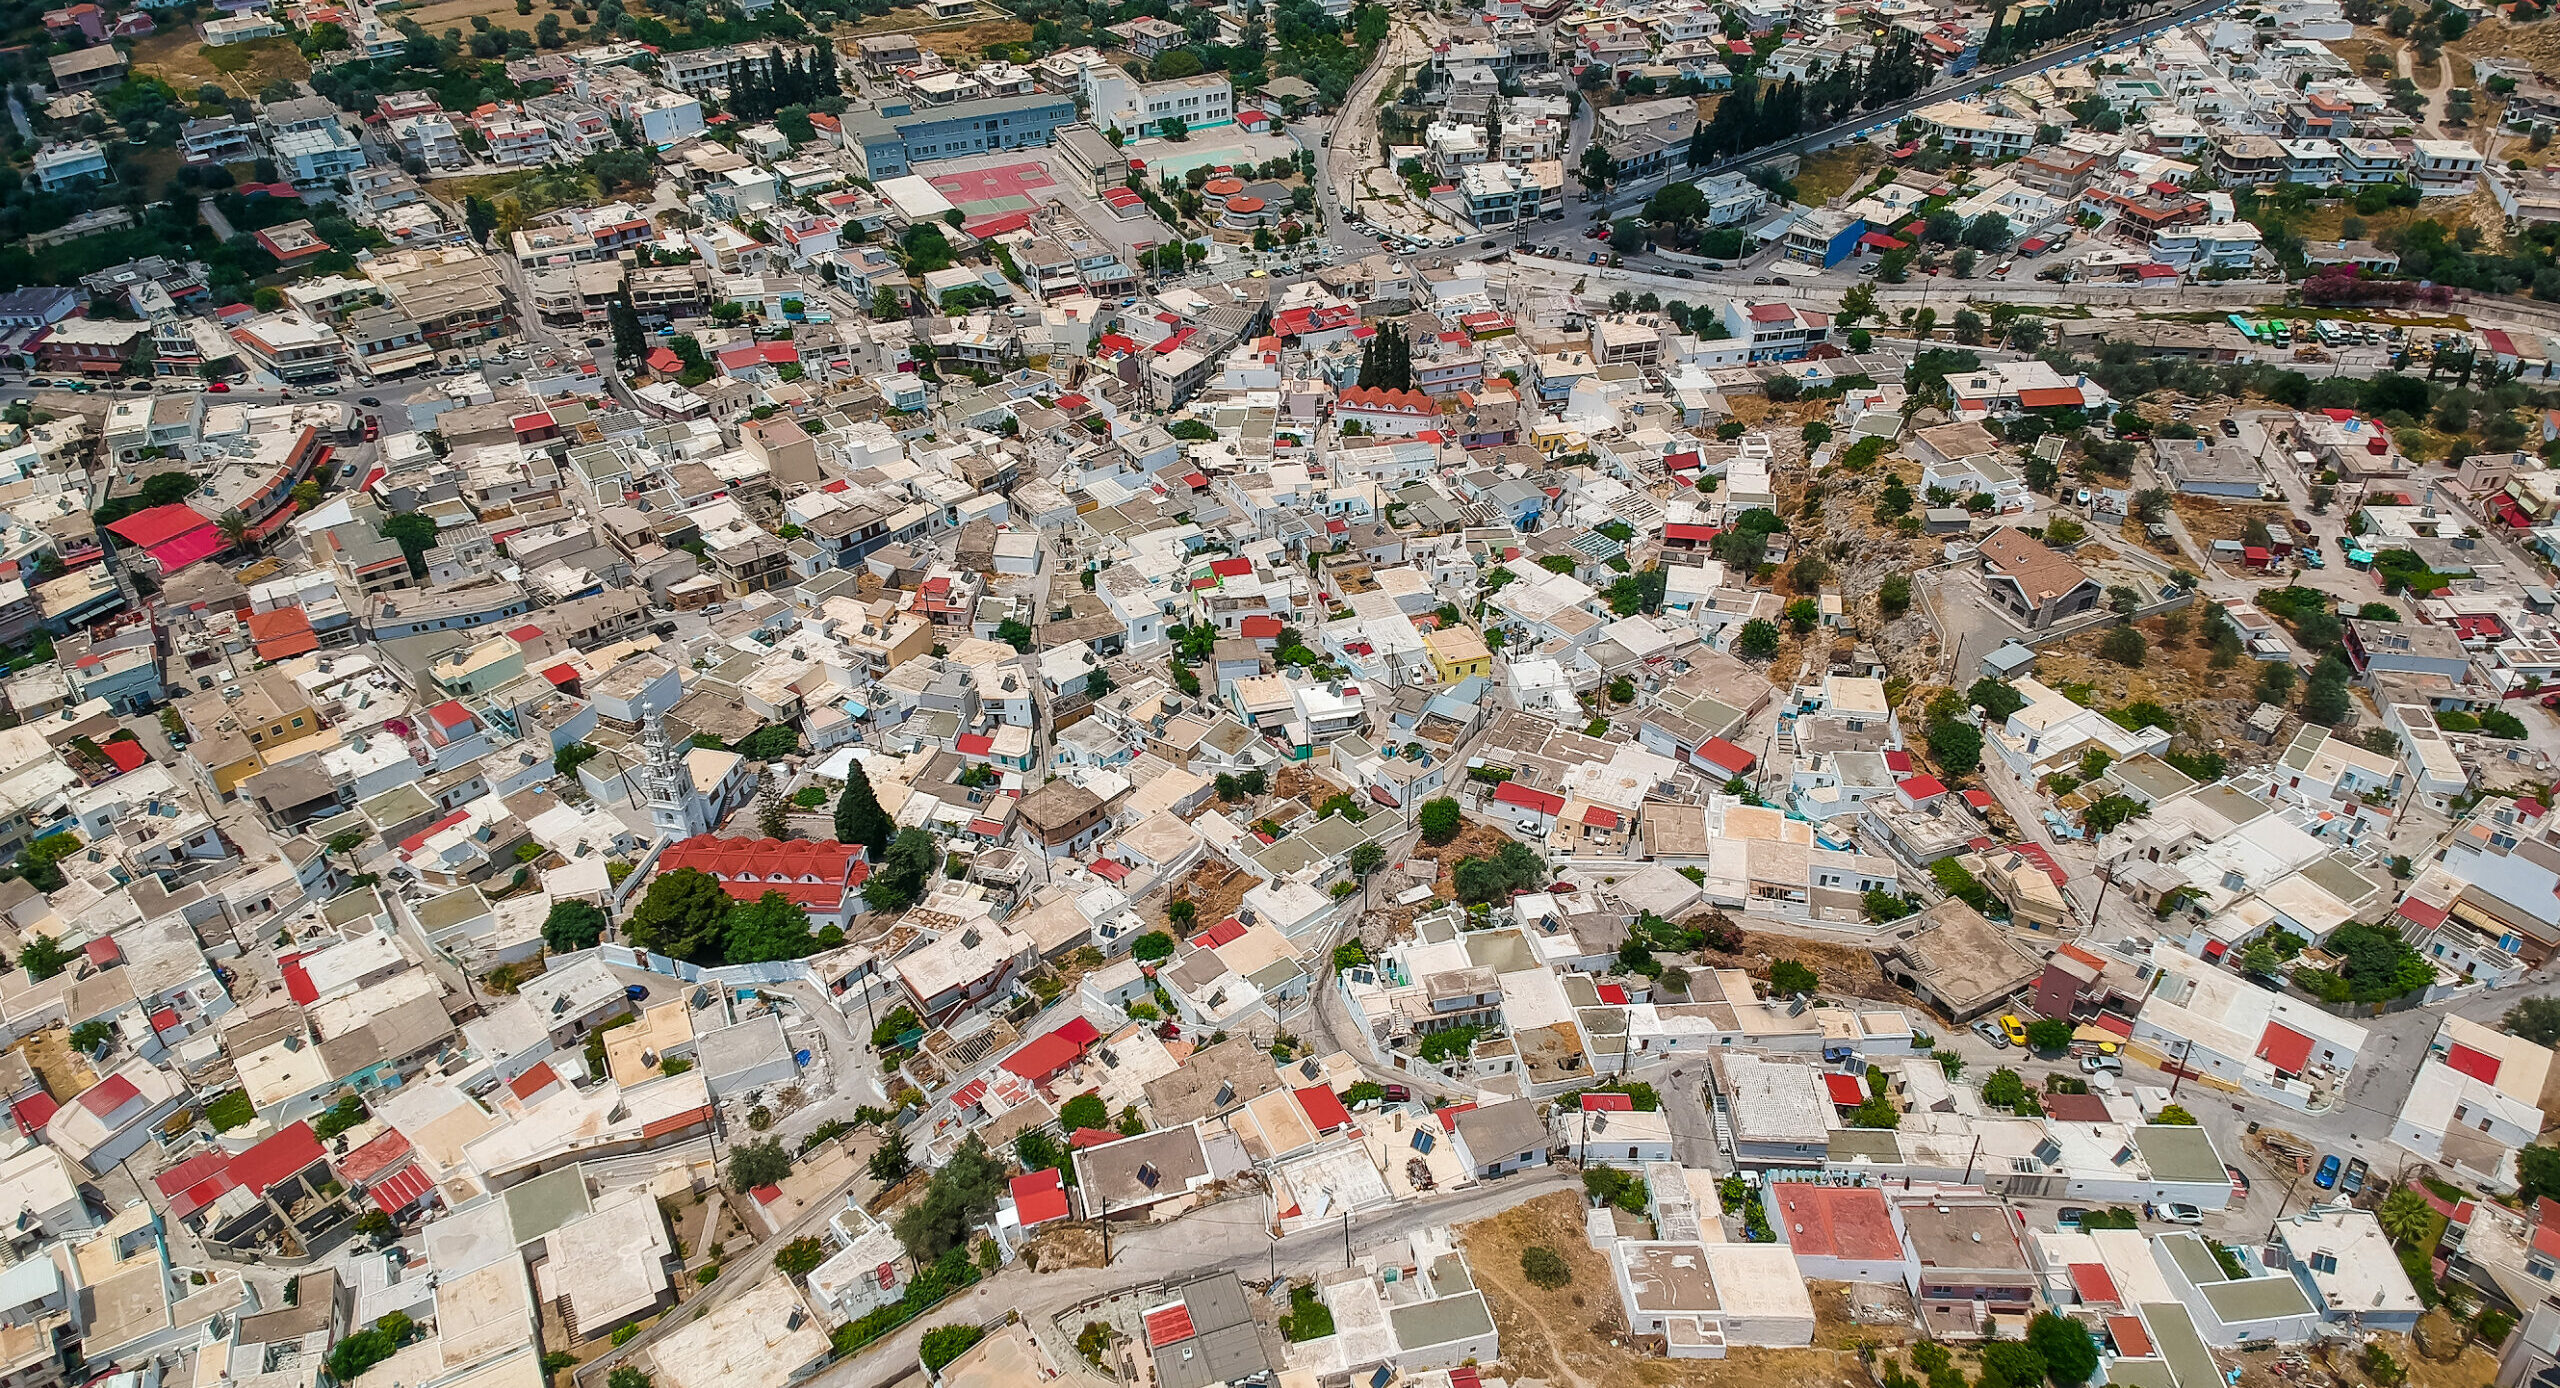 The Greek village that has its own distinct dialect